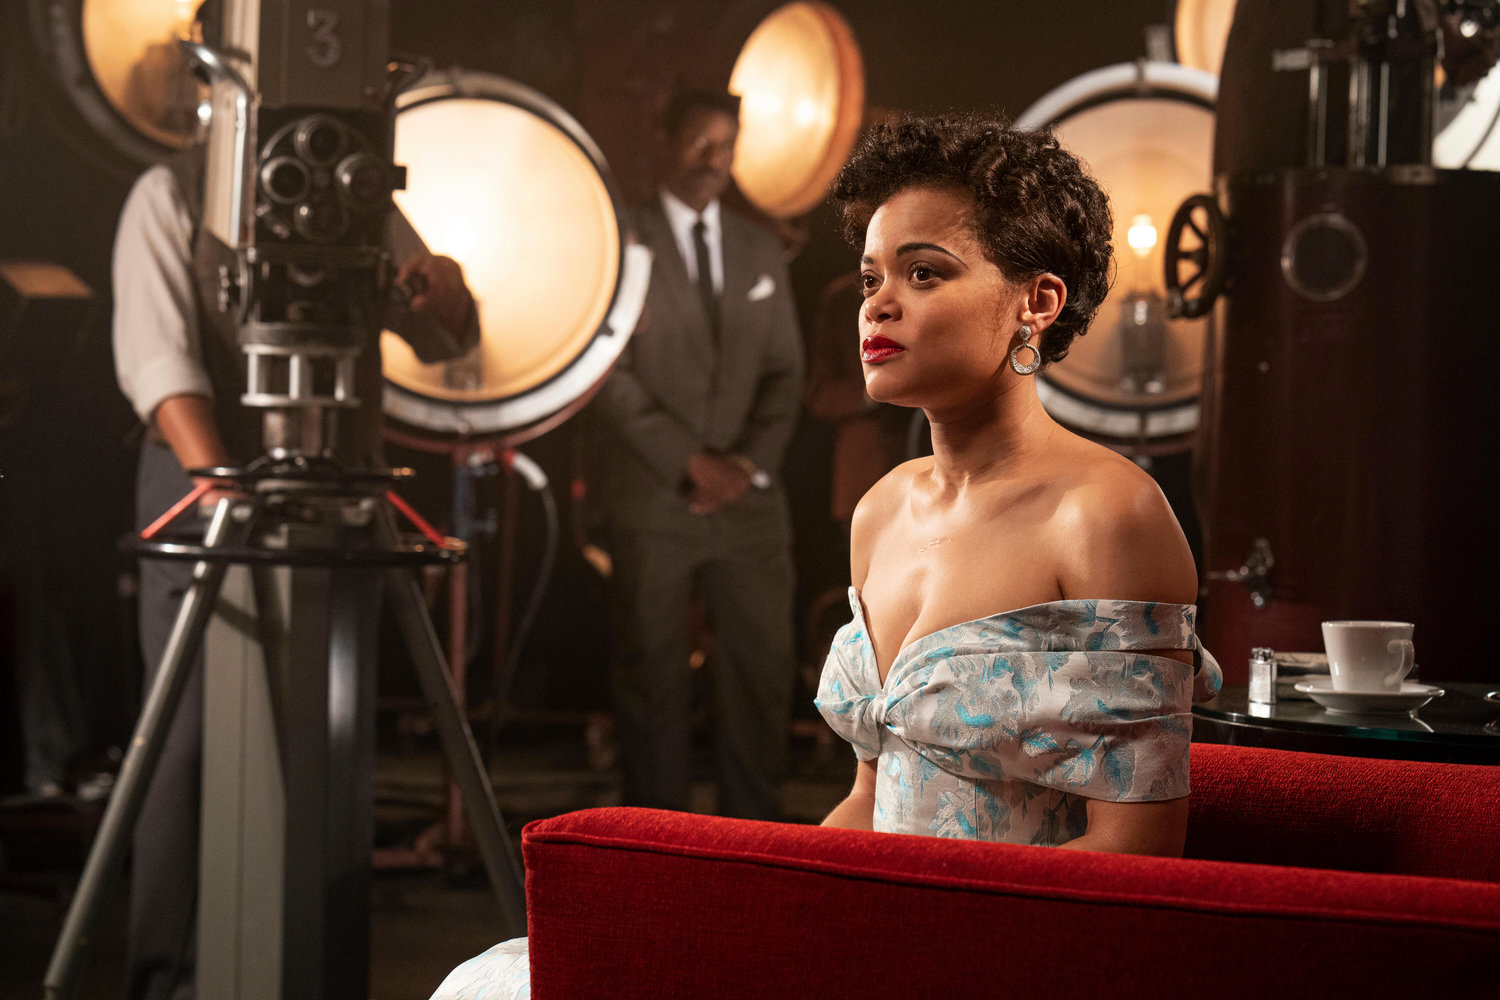 best picture — Andra Day in "The United States vs Billie Holiday." The film has earned a Movies for Grownups Award for best picture.